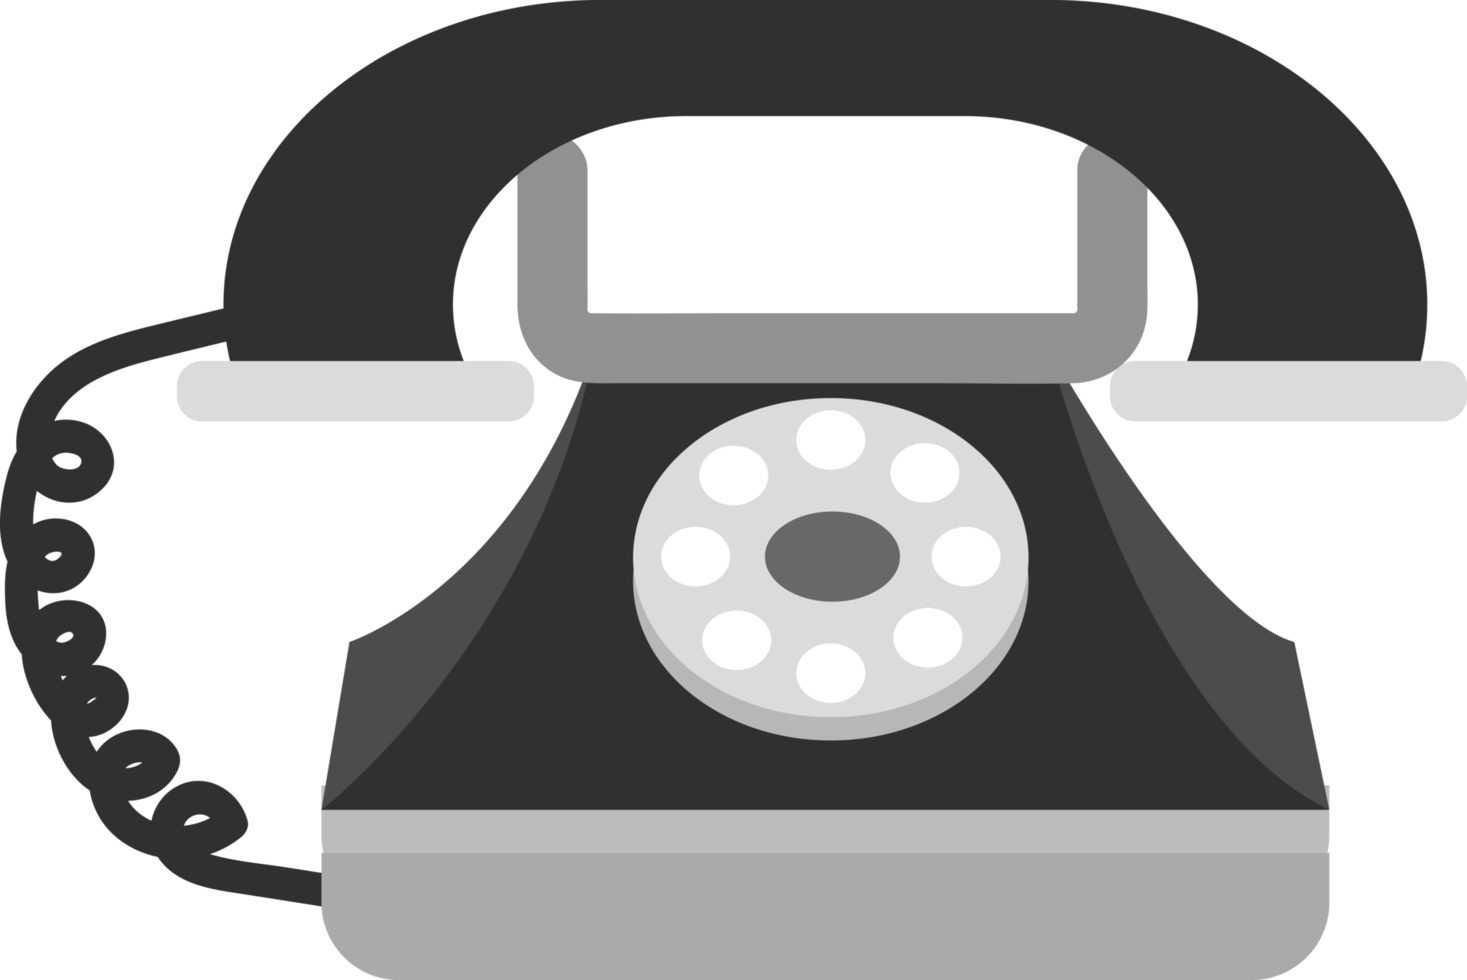 old classic black phone illustration png